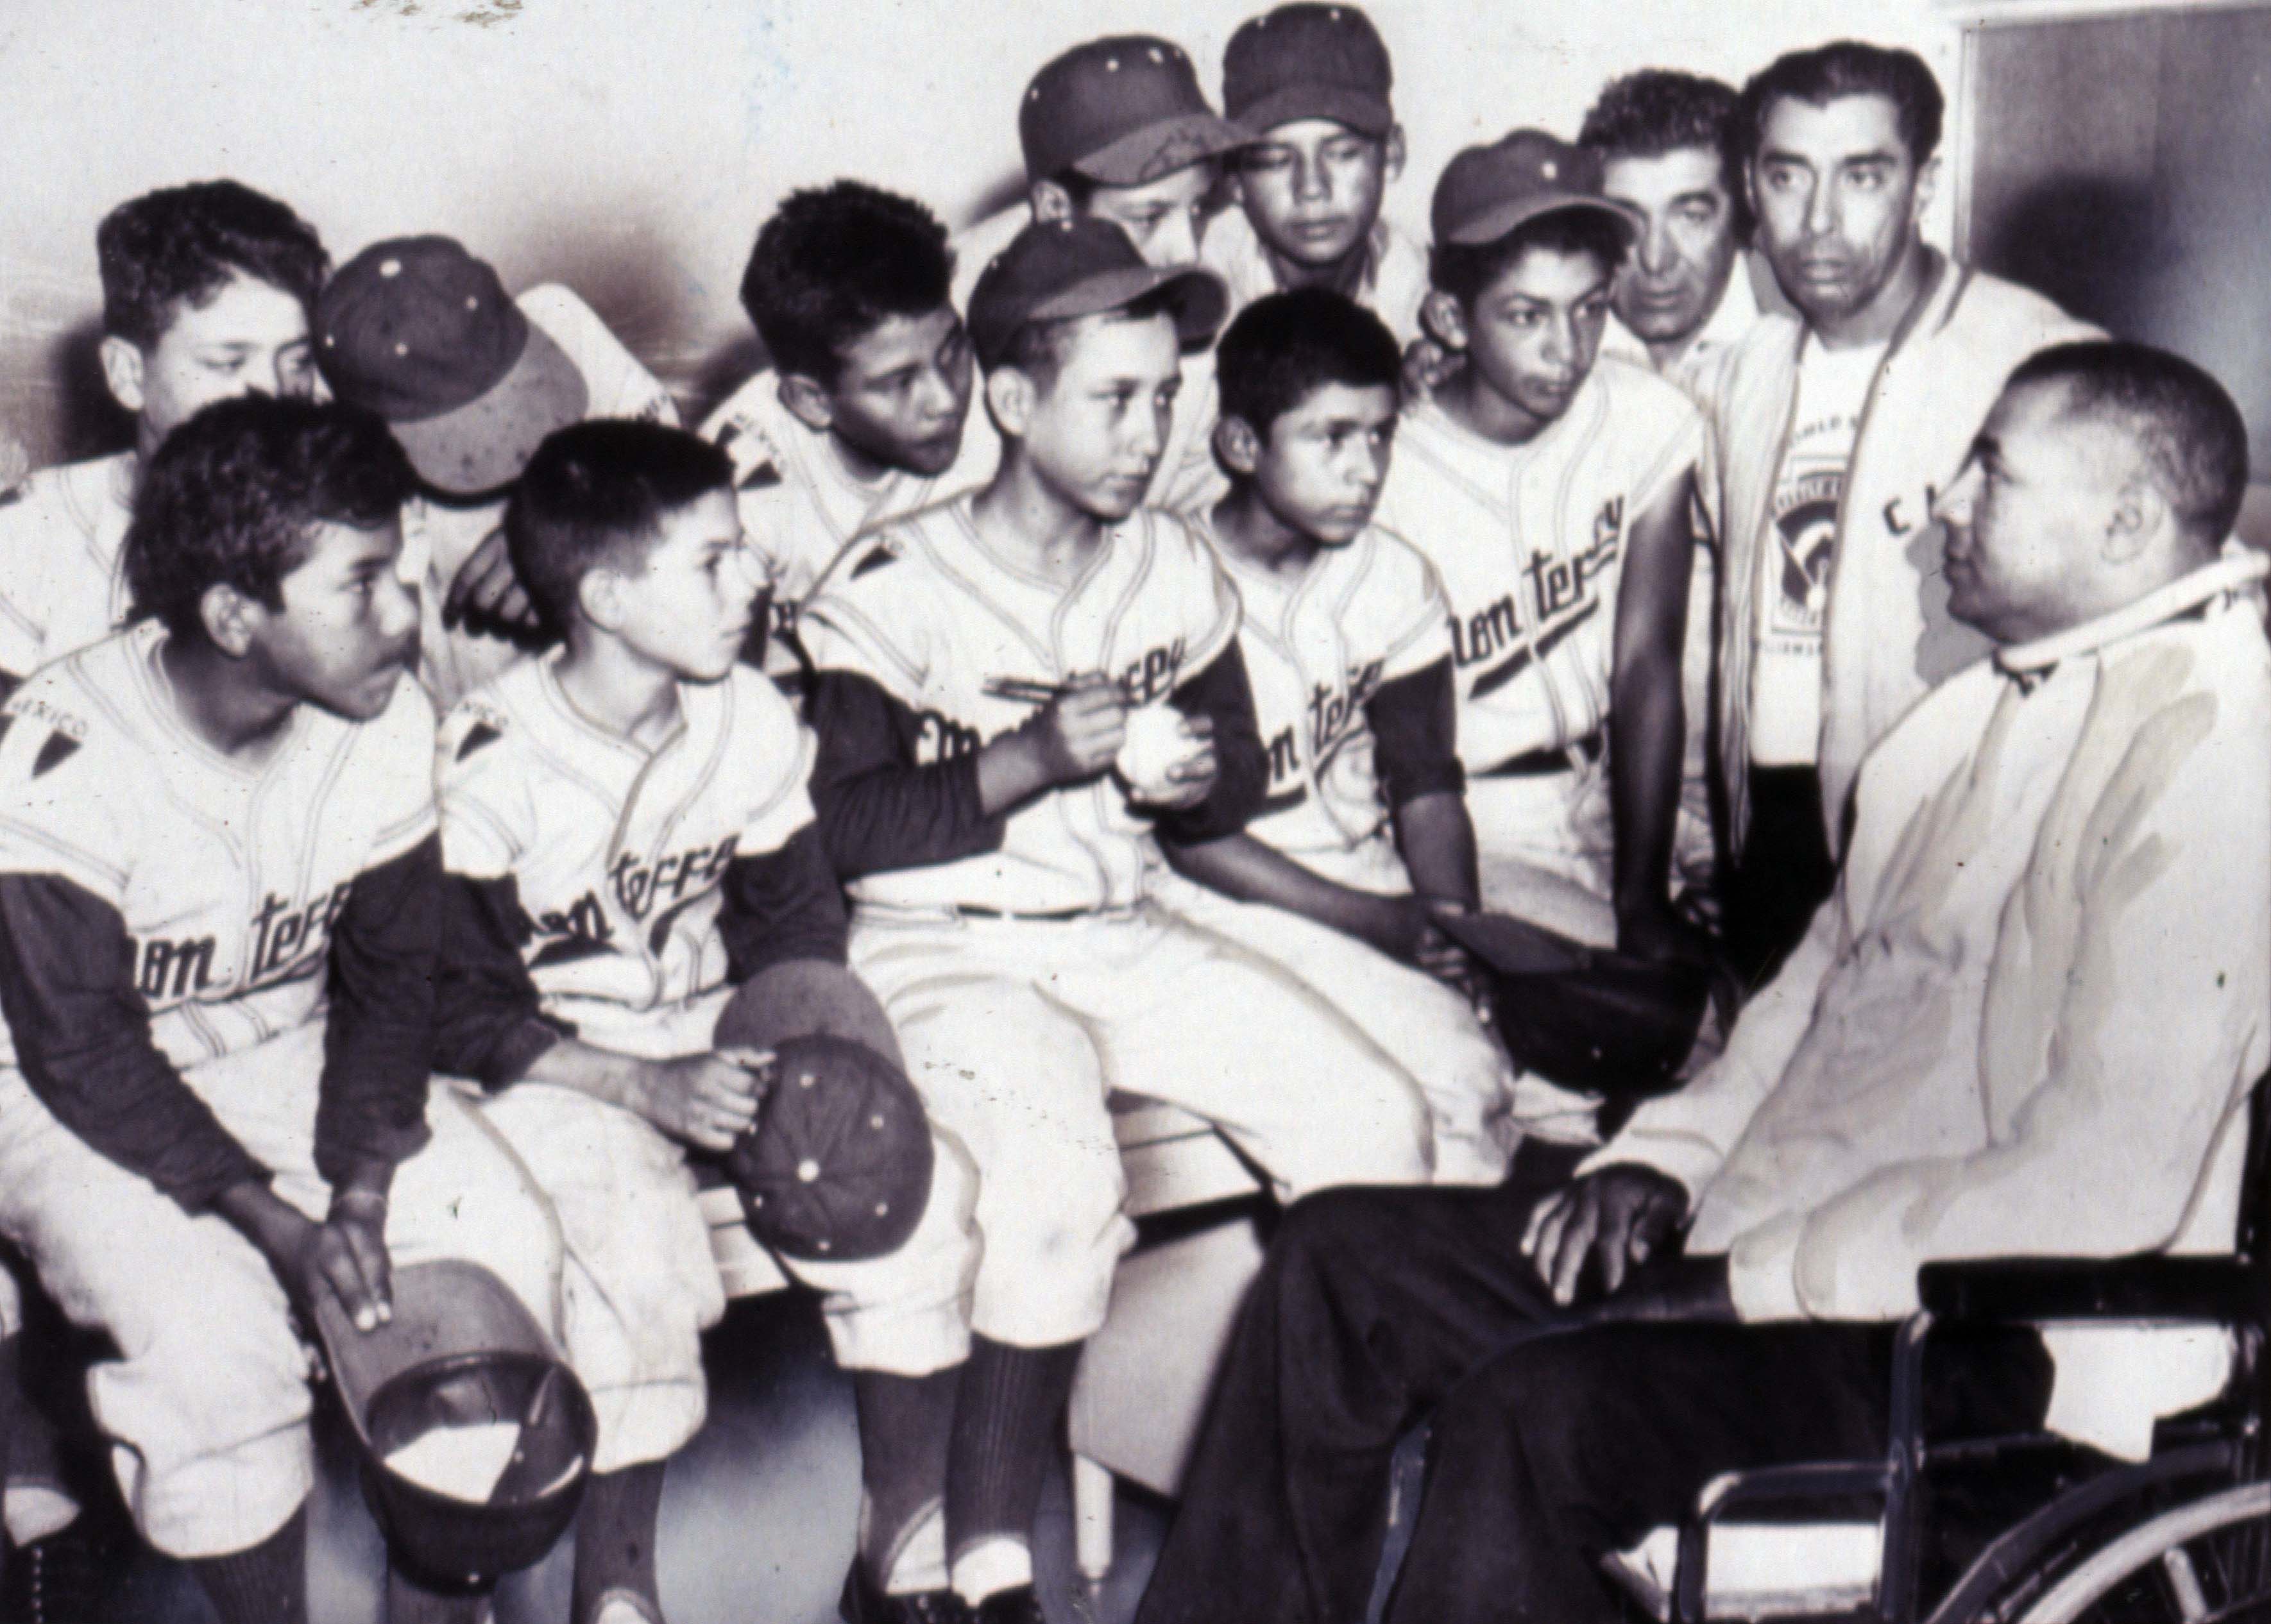  Brooklyn Dodger catcher Roy Campanella meets with a group of Puerto Rican little leaguers in 1958 in Brooklyn, N.Y.